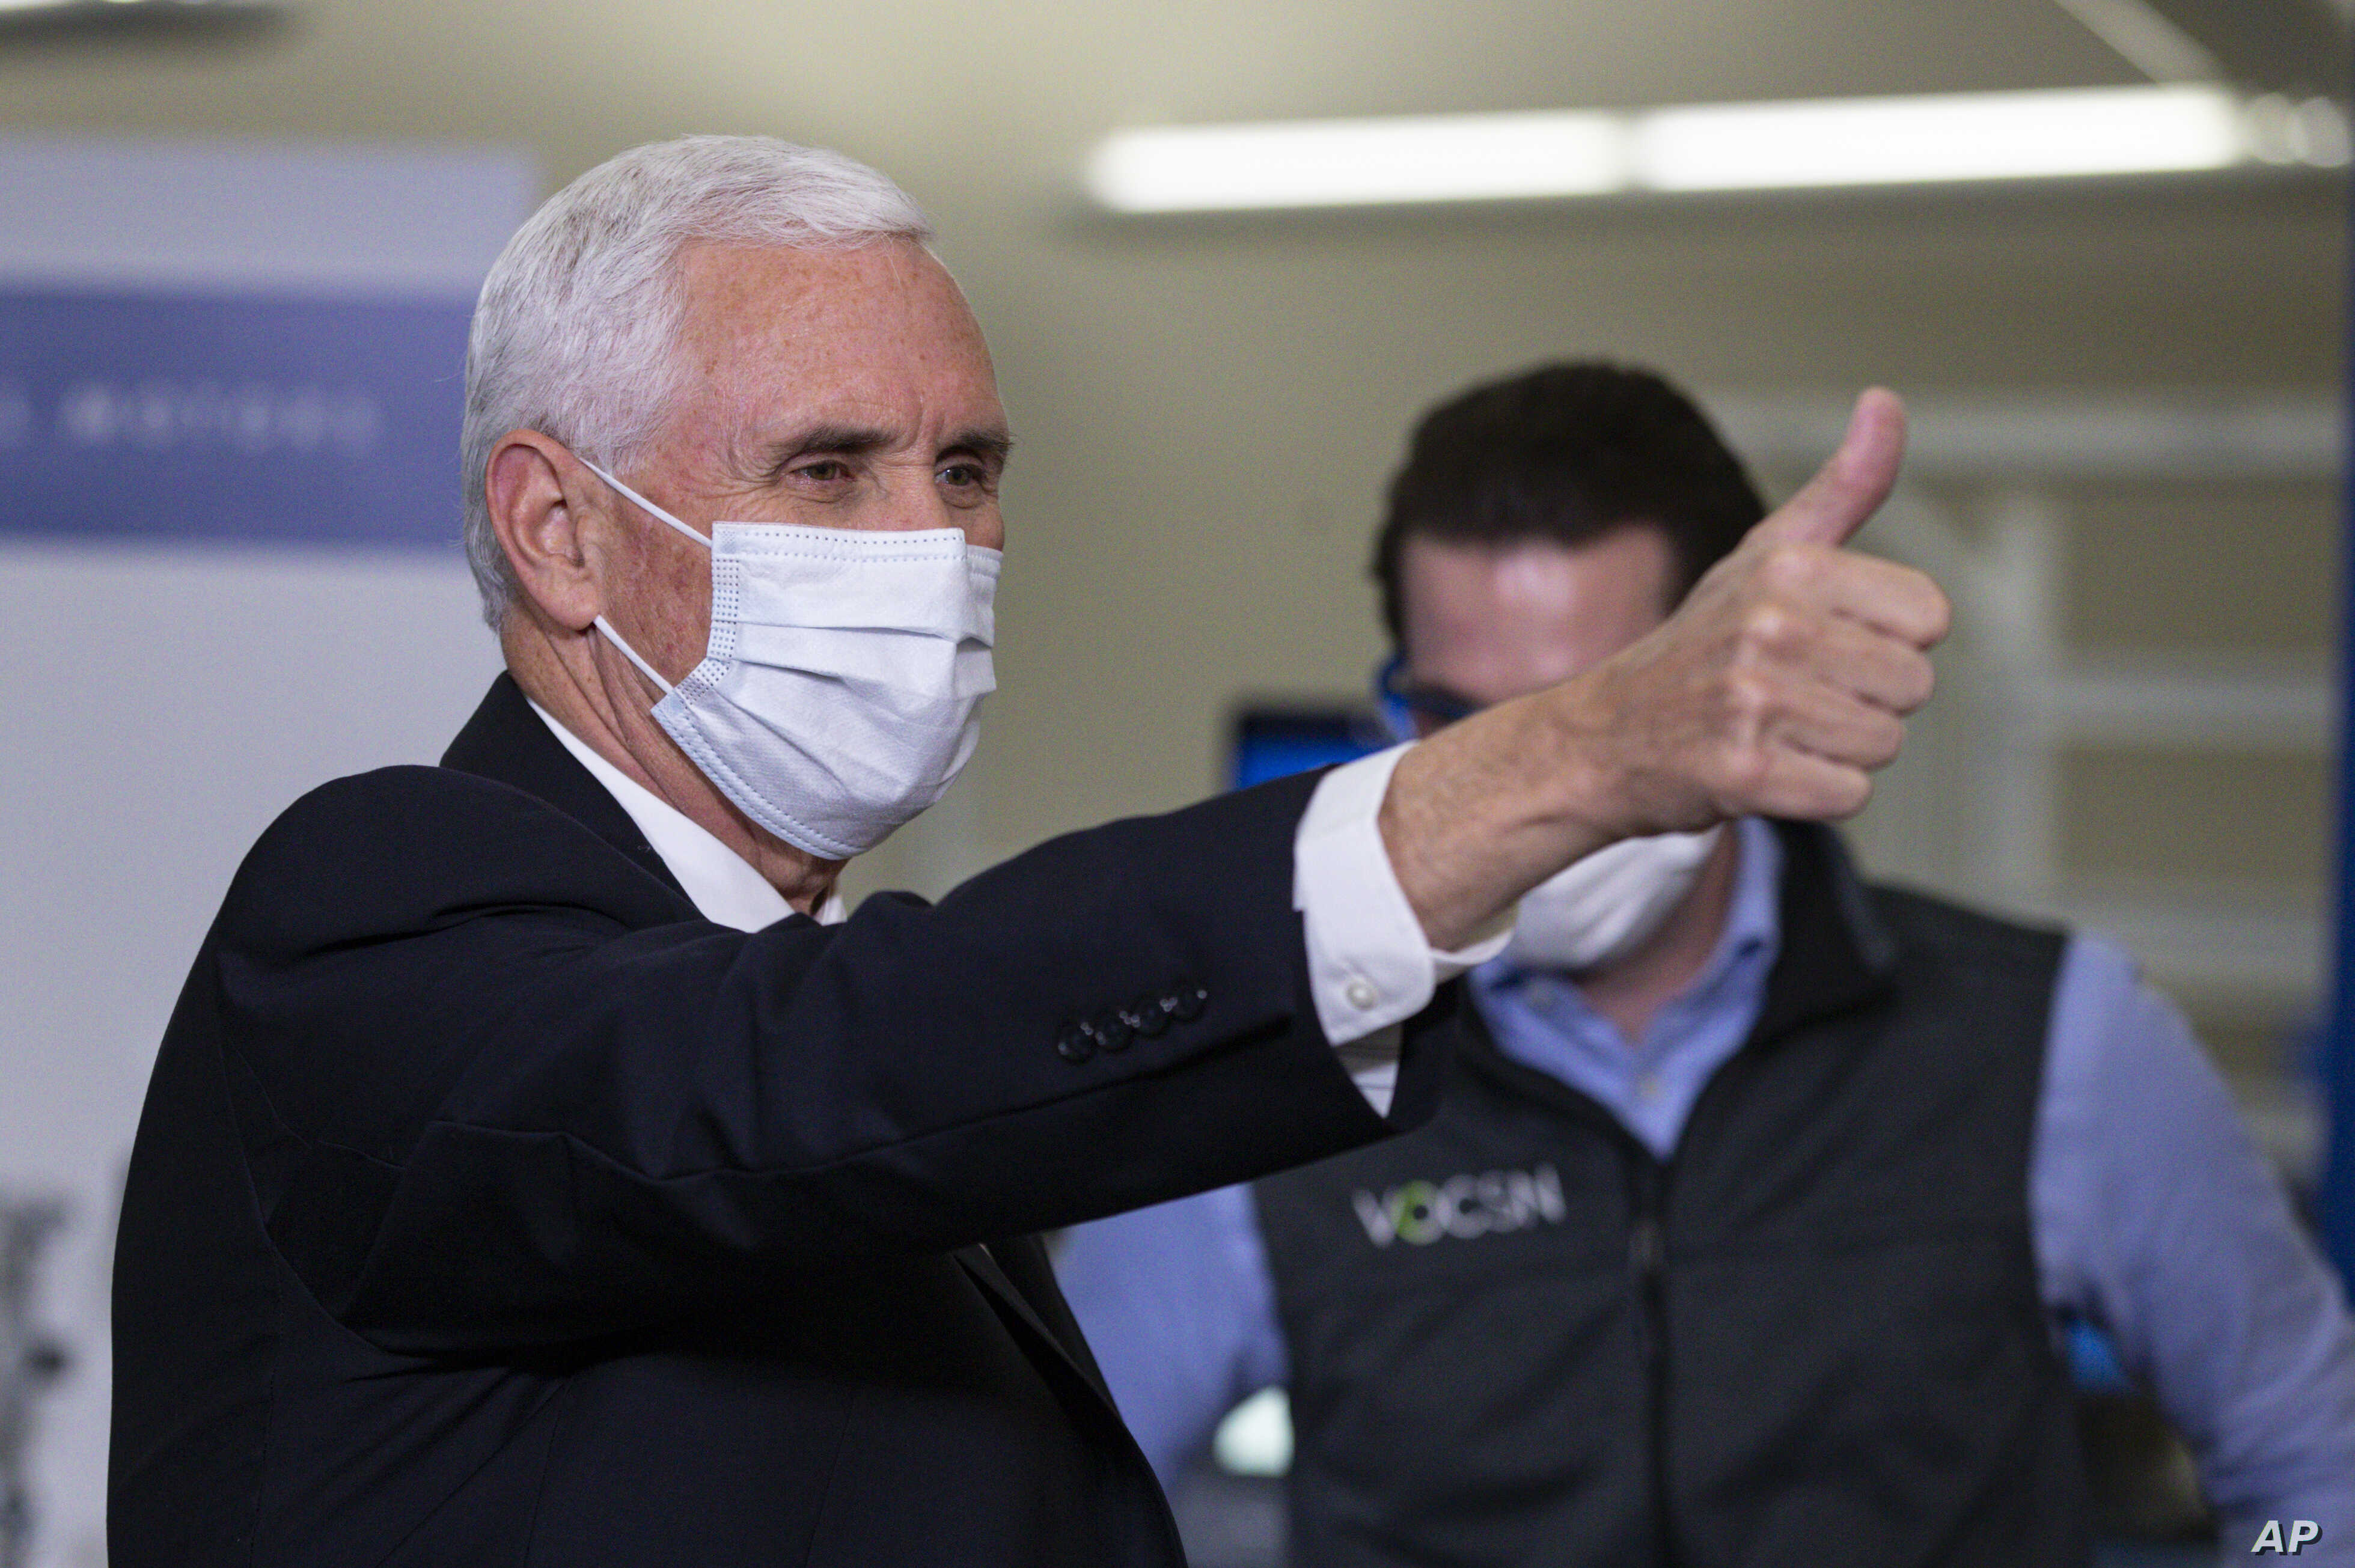 Vice President Mike Pence gestures while visiting the General Motors/Ventec ventilator production facility in Kokomo, Ind., Thursday, April 30, 2020. (AP Photo/Michael Conroy)